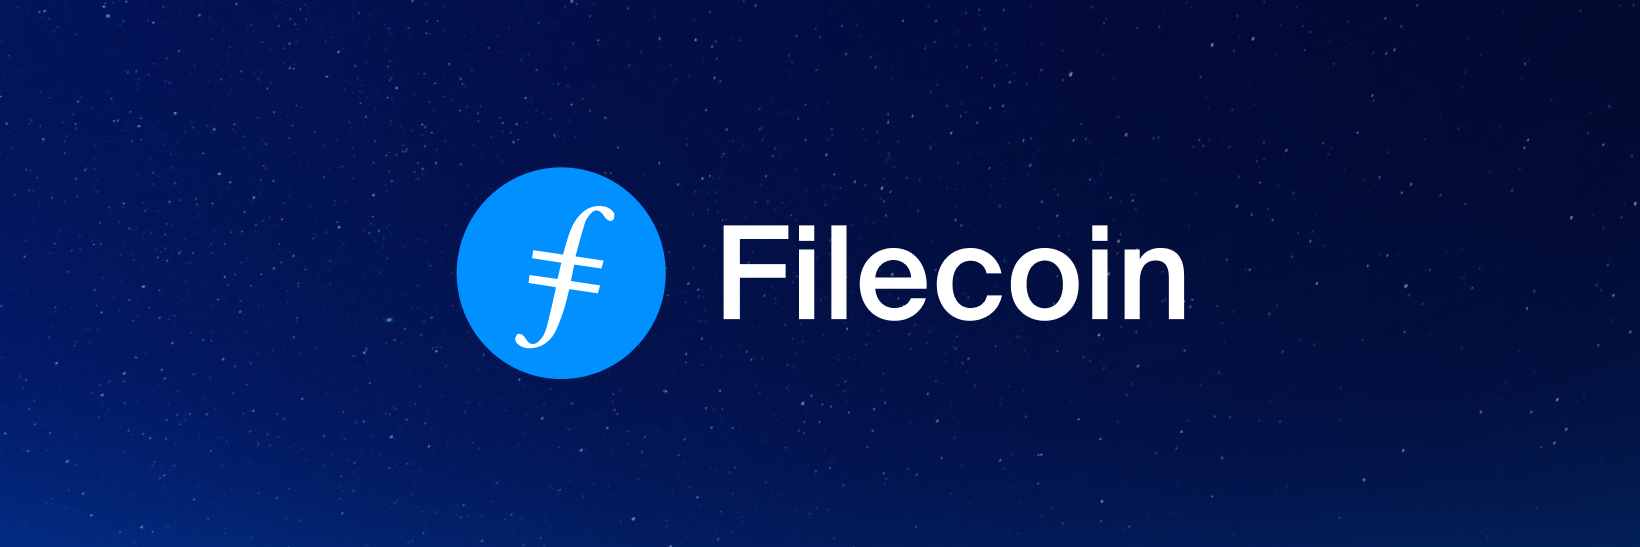 How to Buy Filecoin (FIL) | Buy Filecoin in 6 Simple Steps | Gemini